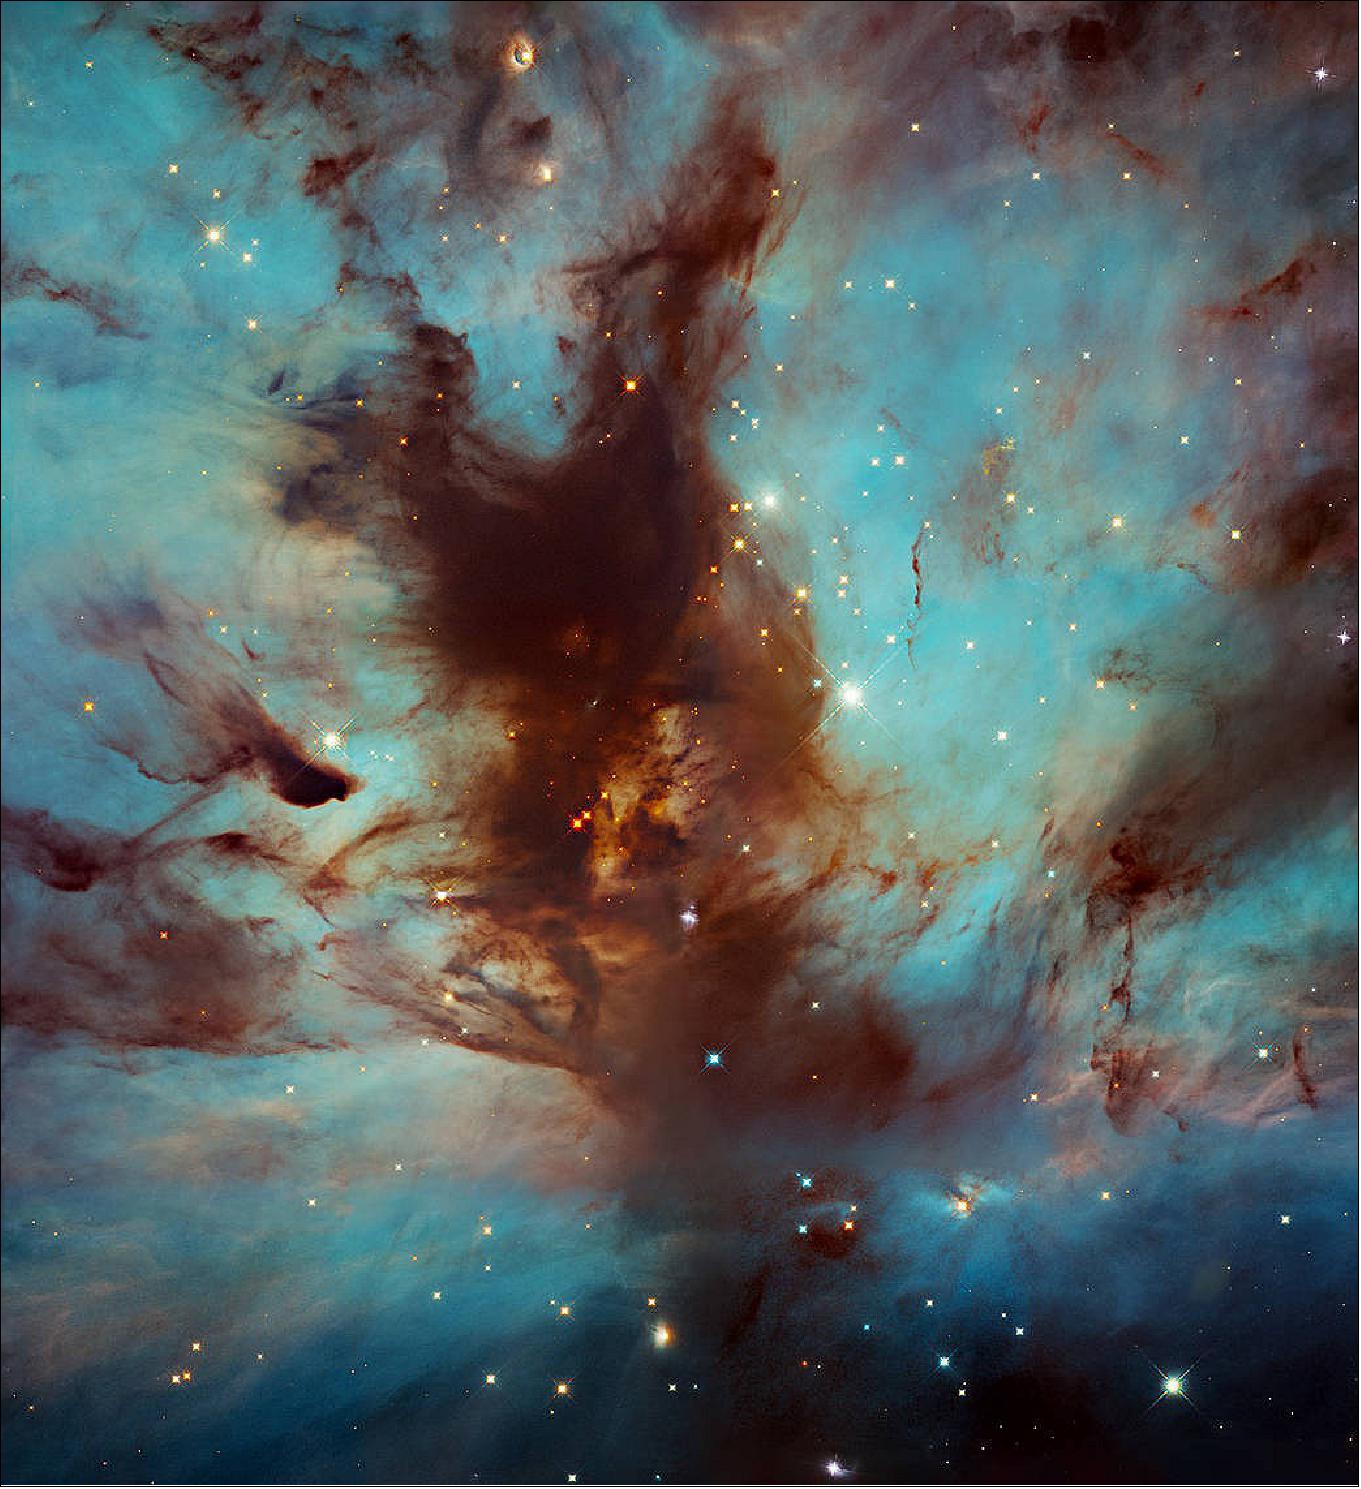 Figure 11: Researchers have used Hubble to measure the mass of stars in the cluster as they search for brown dwarfs, a type of dim object that’s too hot and massive to be classified as a planet but also too small and cool to shine like a star [image credit: NASA, ESA, and N. Da Rio (University of Virginia); Processing: Gladys Kober (NASA/Catholic University of America)]